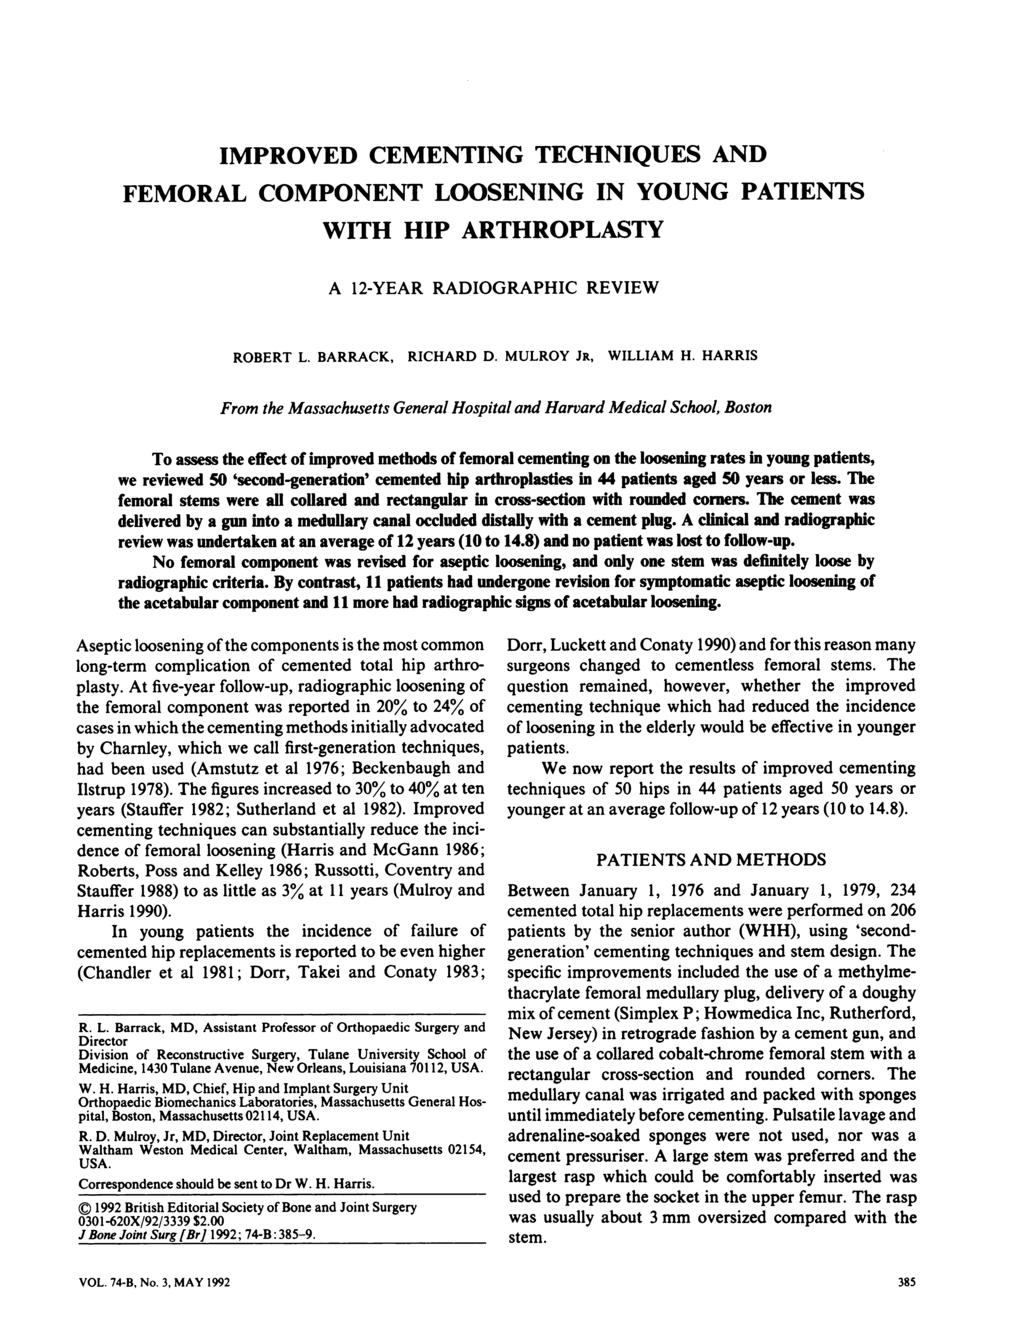 IMPROVED CEMENTING TECHNIQUES AND FEMORAL COMPONENT LOOSENING IN YOUNG PATIENTS WITH HIP ARTHROPLASTY A 12-YEAR RADIOGRAPHIC REVIEW ROBERT L. BARRACK, RICHARD D. MULROY JR, WILLIAM H.